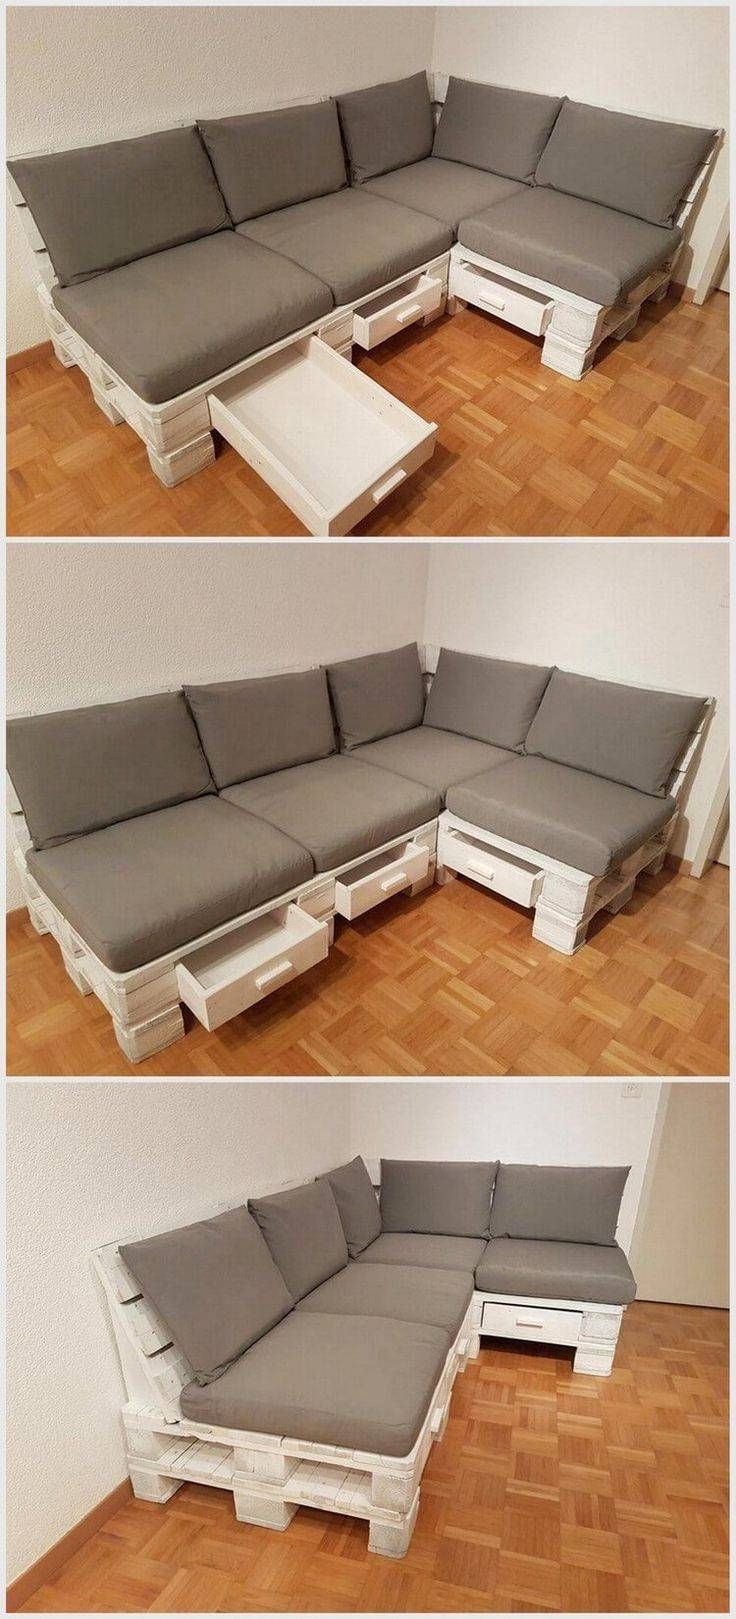 25+ Best Pallet Couch Ideas On Pinterest | Pallet Sofa, Pallet Inside Pallet Sofas (View 6 of 15)